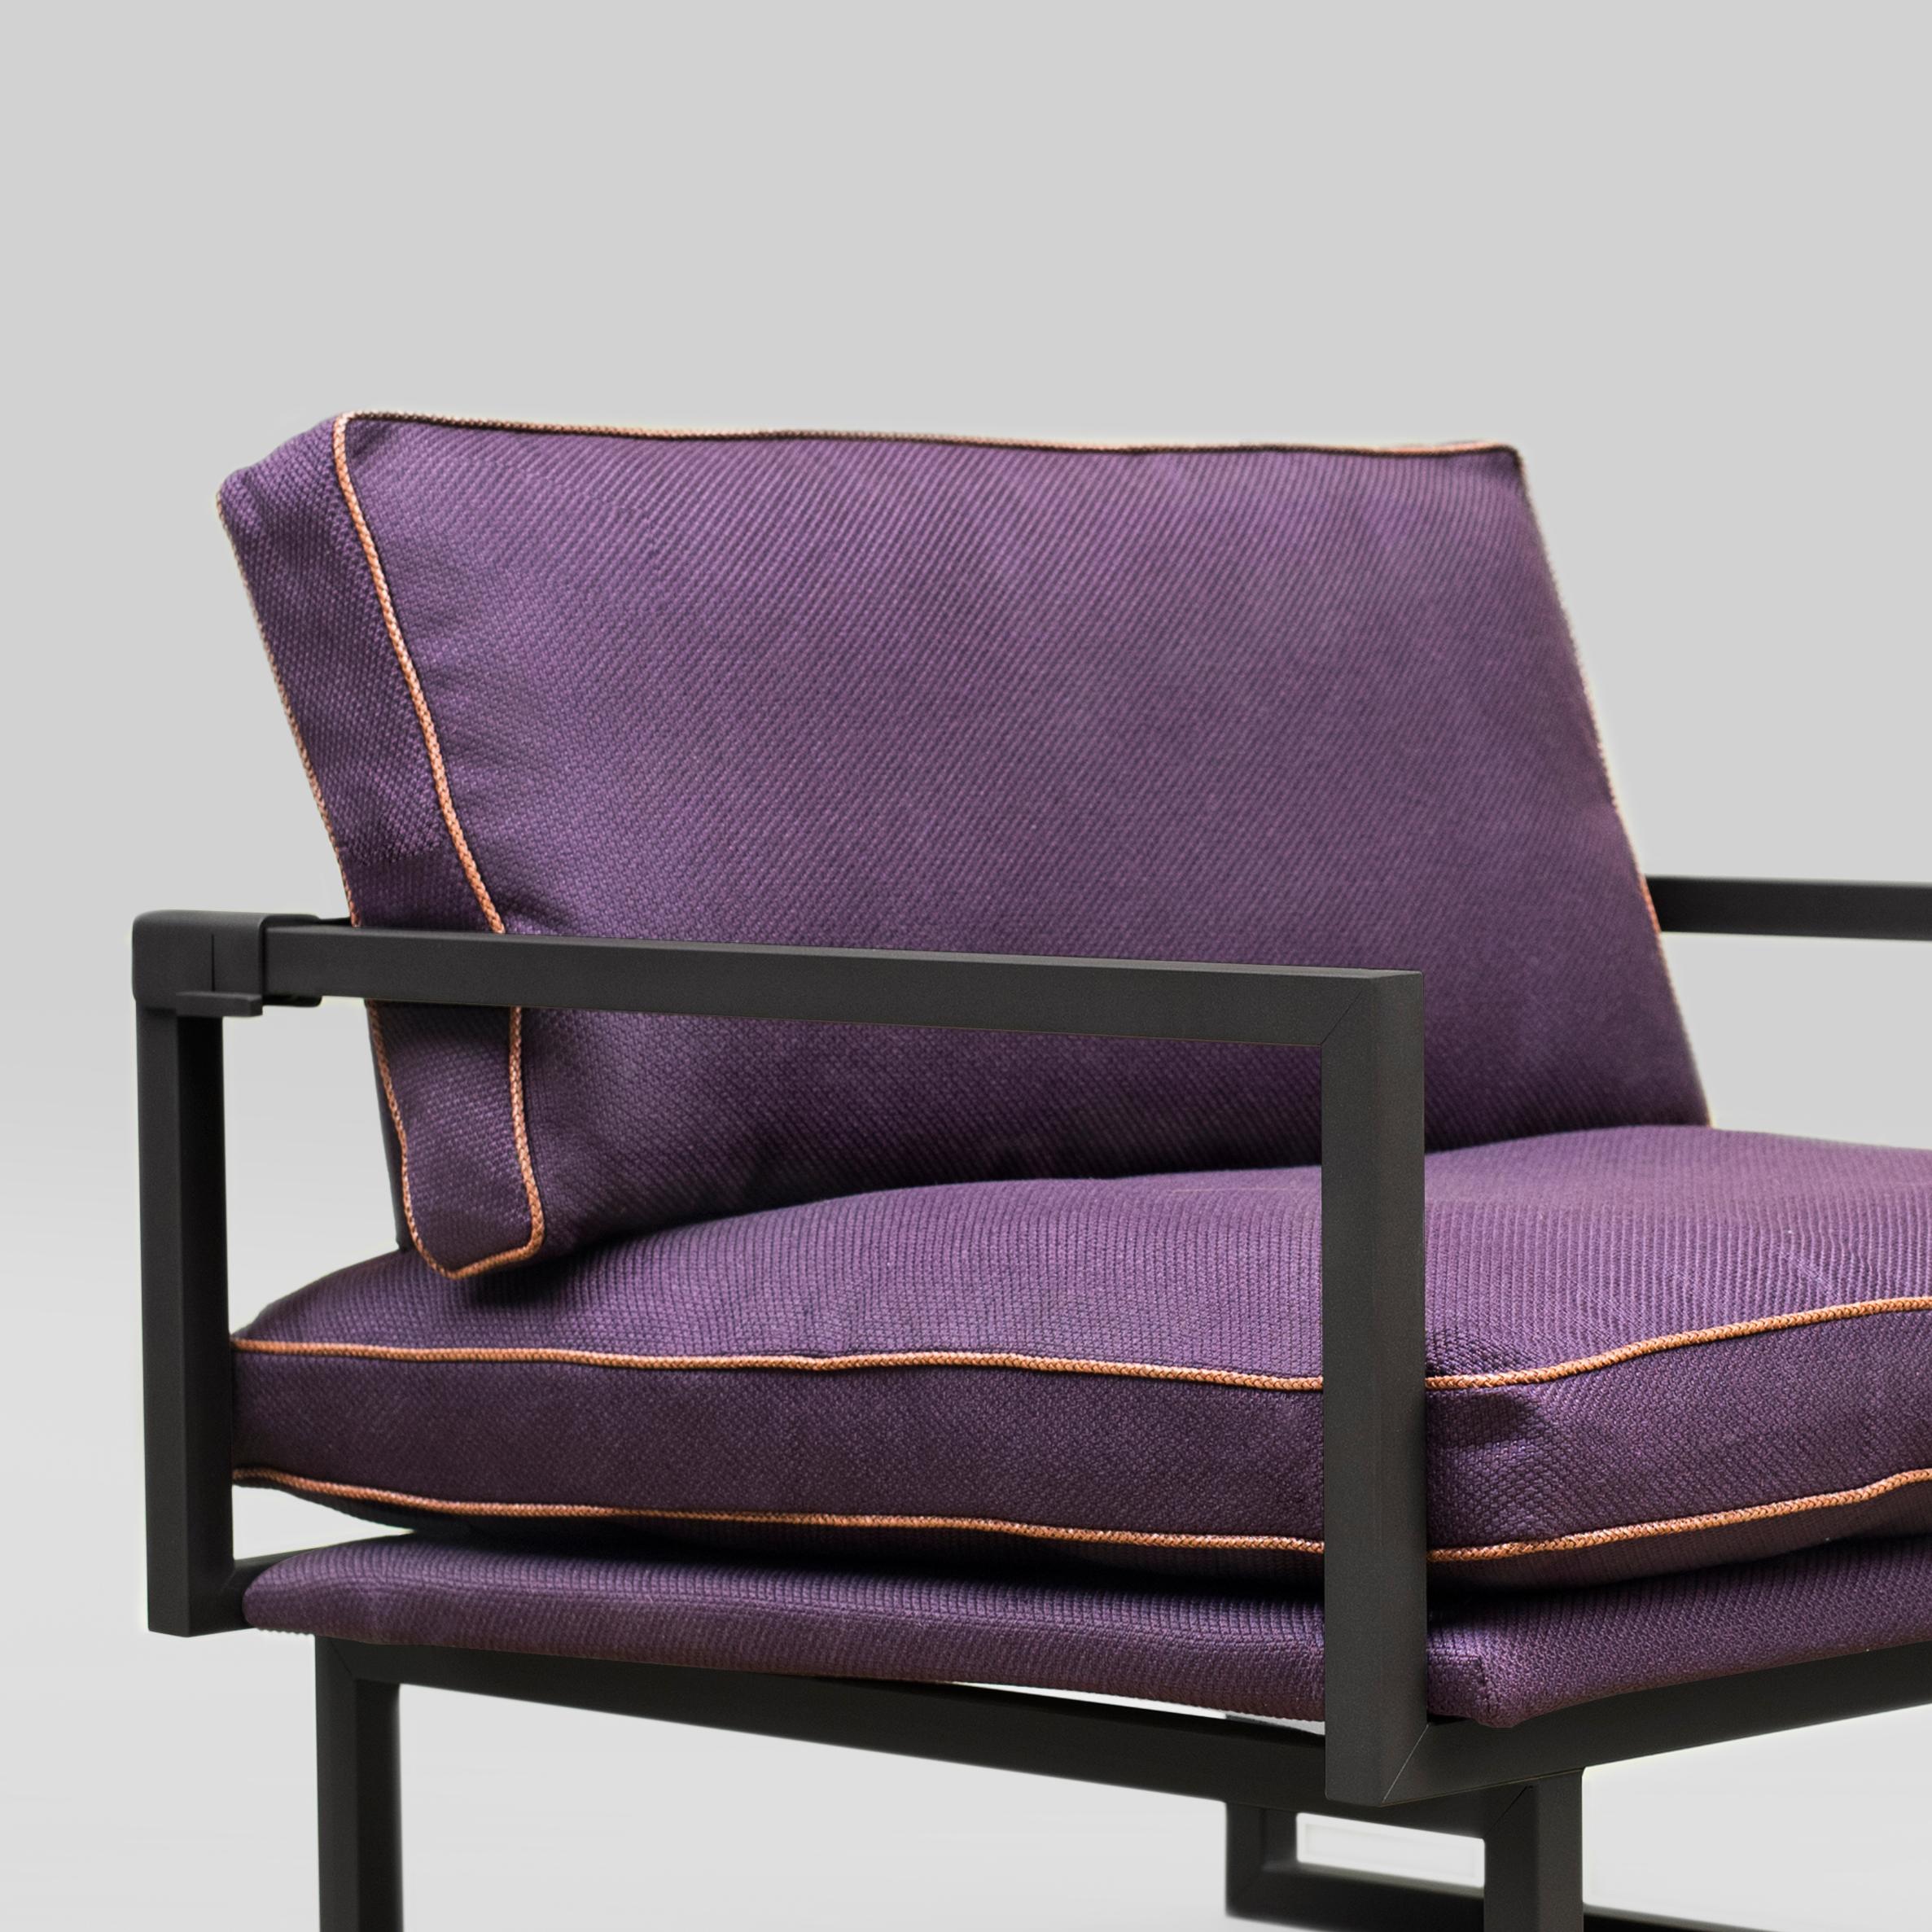 Armchair designed by Peter Ghyczy in 2009.
Manufactured by Ghyczy (Netherlands)

This armchair has an airy and light weight architectural construction. The GP01 is designed with an adjustable backrest, which allows to adjust the seat